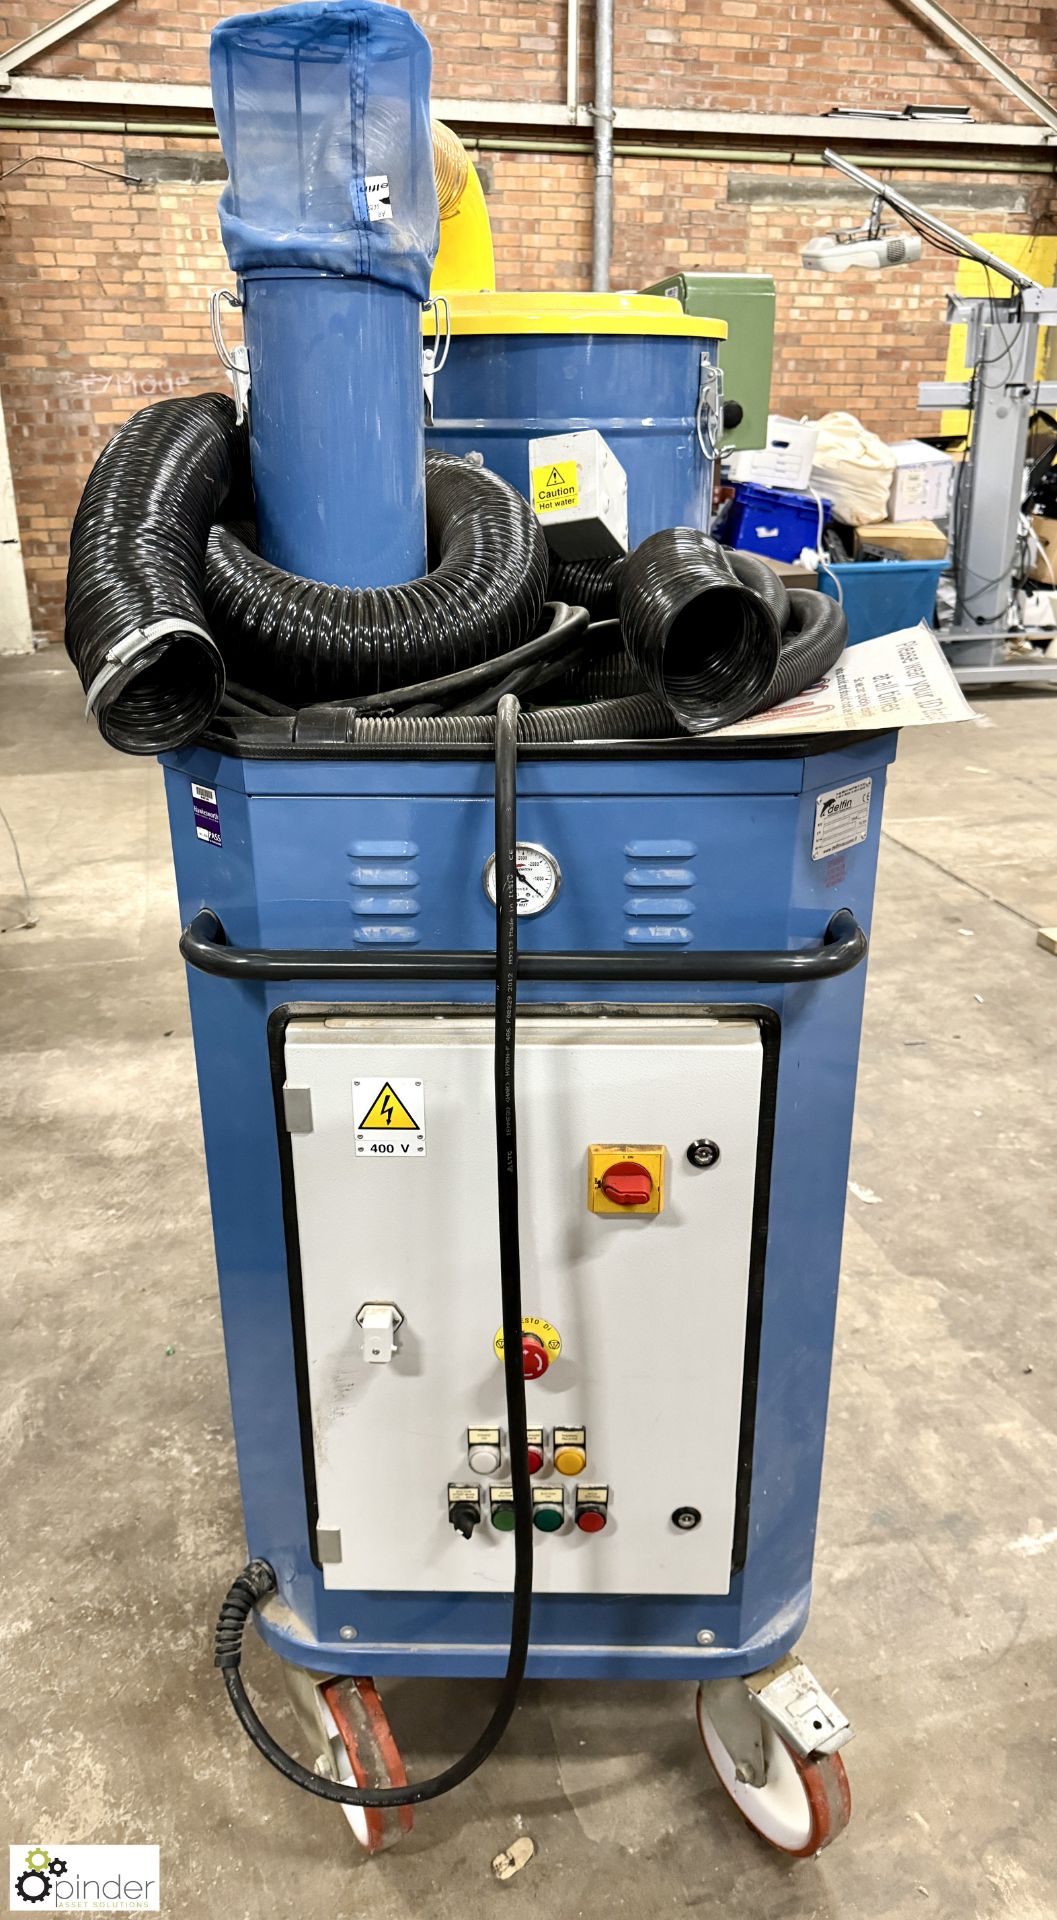 Delfin D/G150 heavy duty Industrial Vacuum Cleaner, 415volts - Image 4 of 8